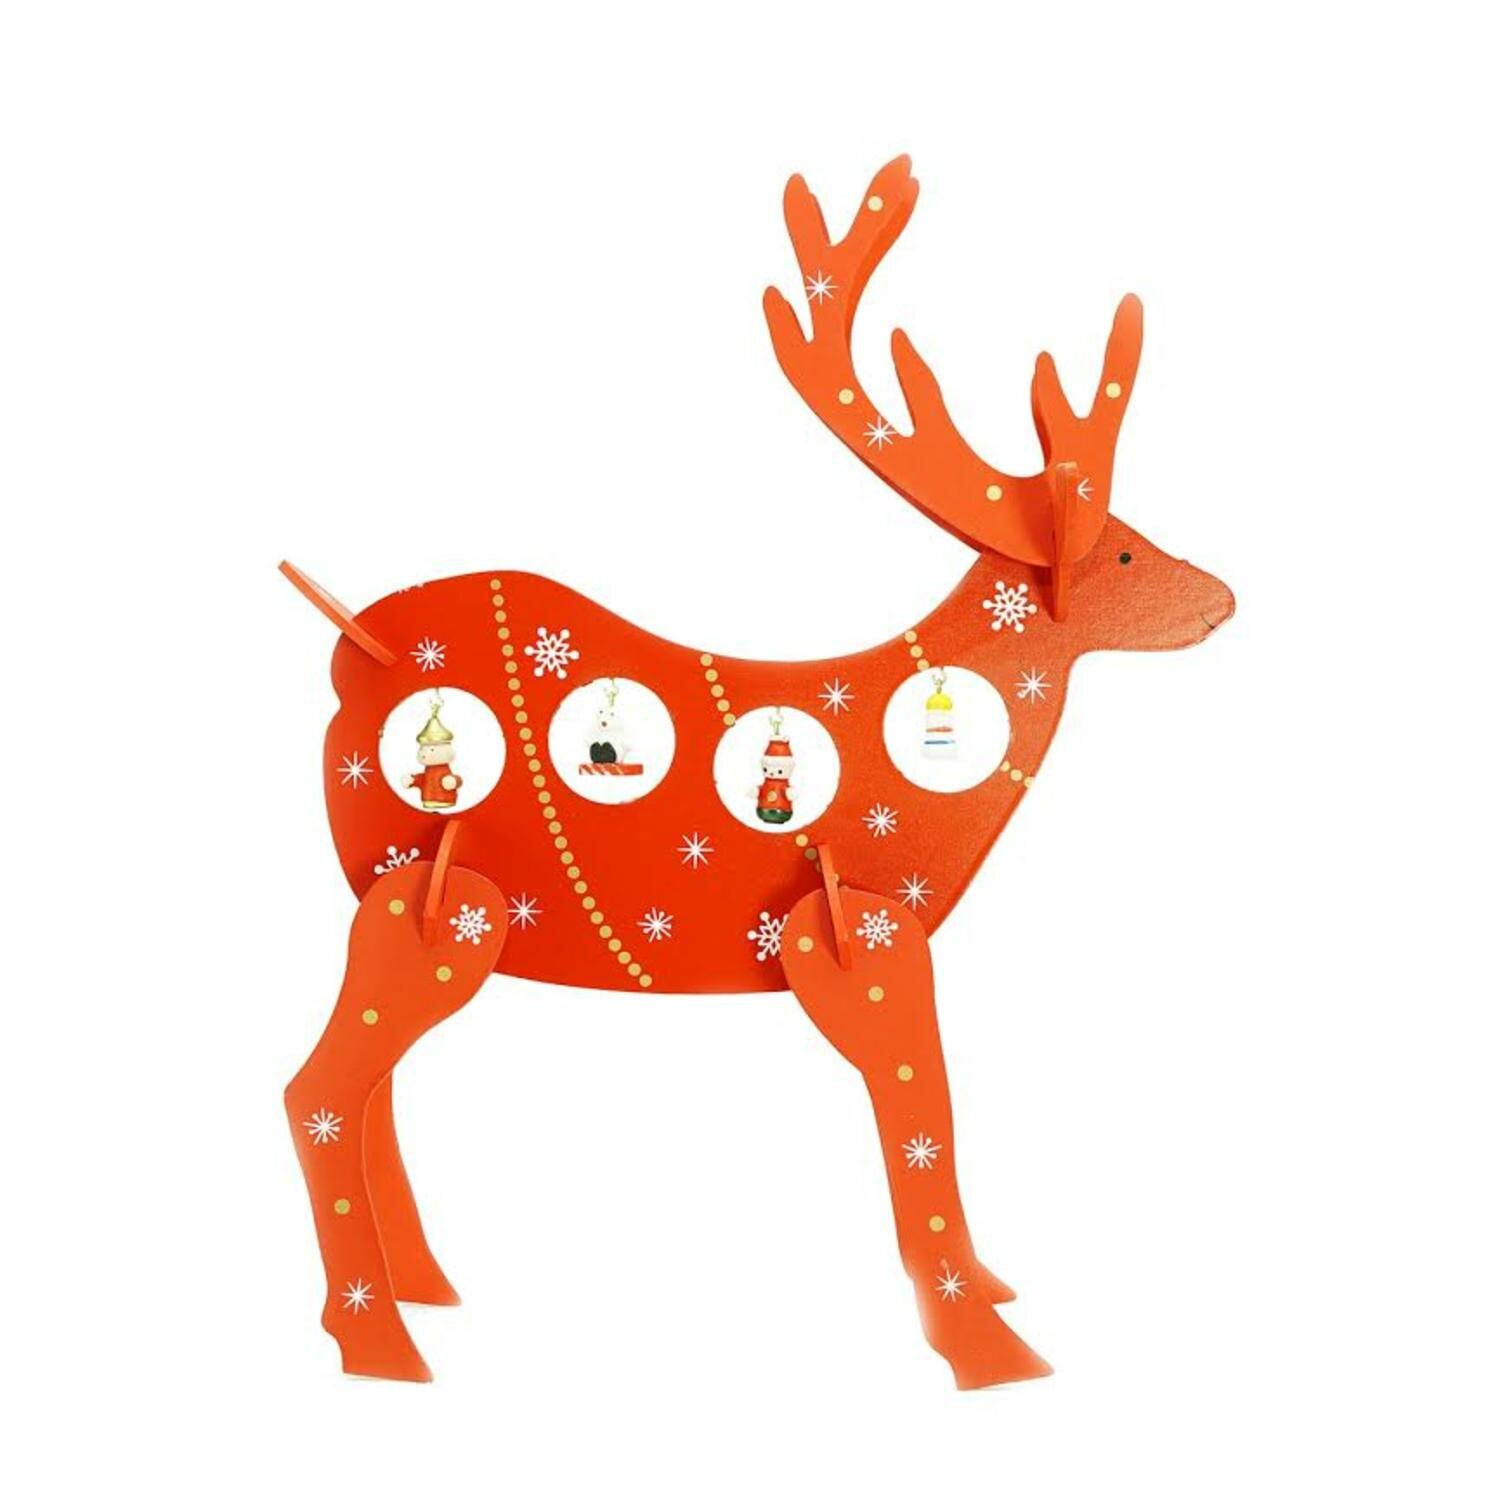 The Holiday Aisle Decorative Wooden Reindeer Cut Out Christmas